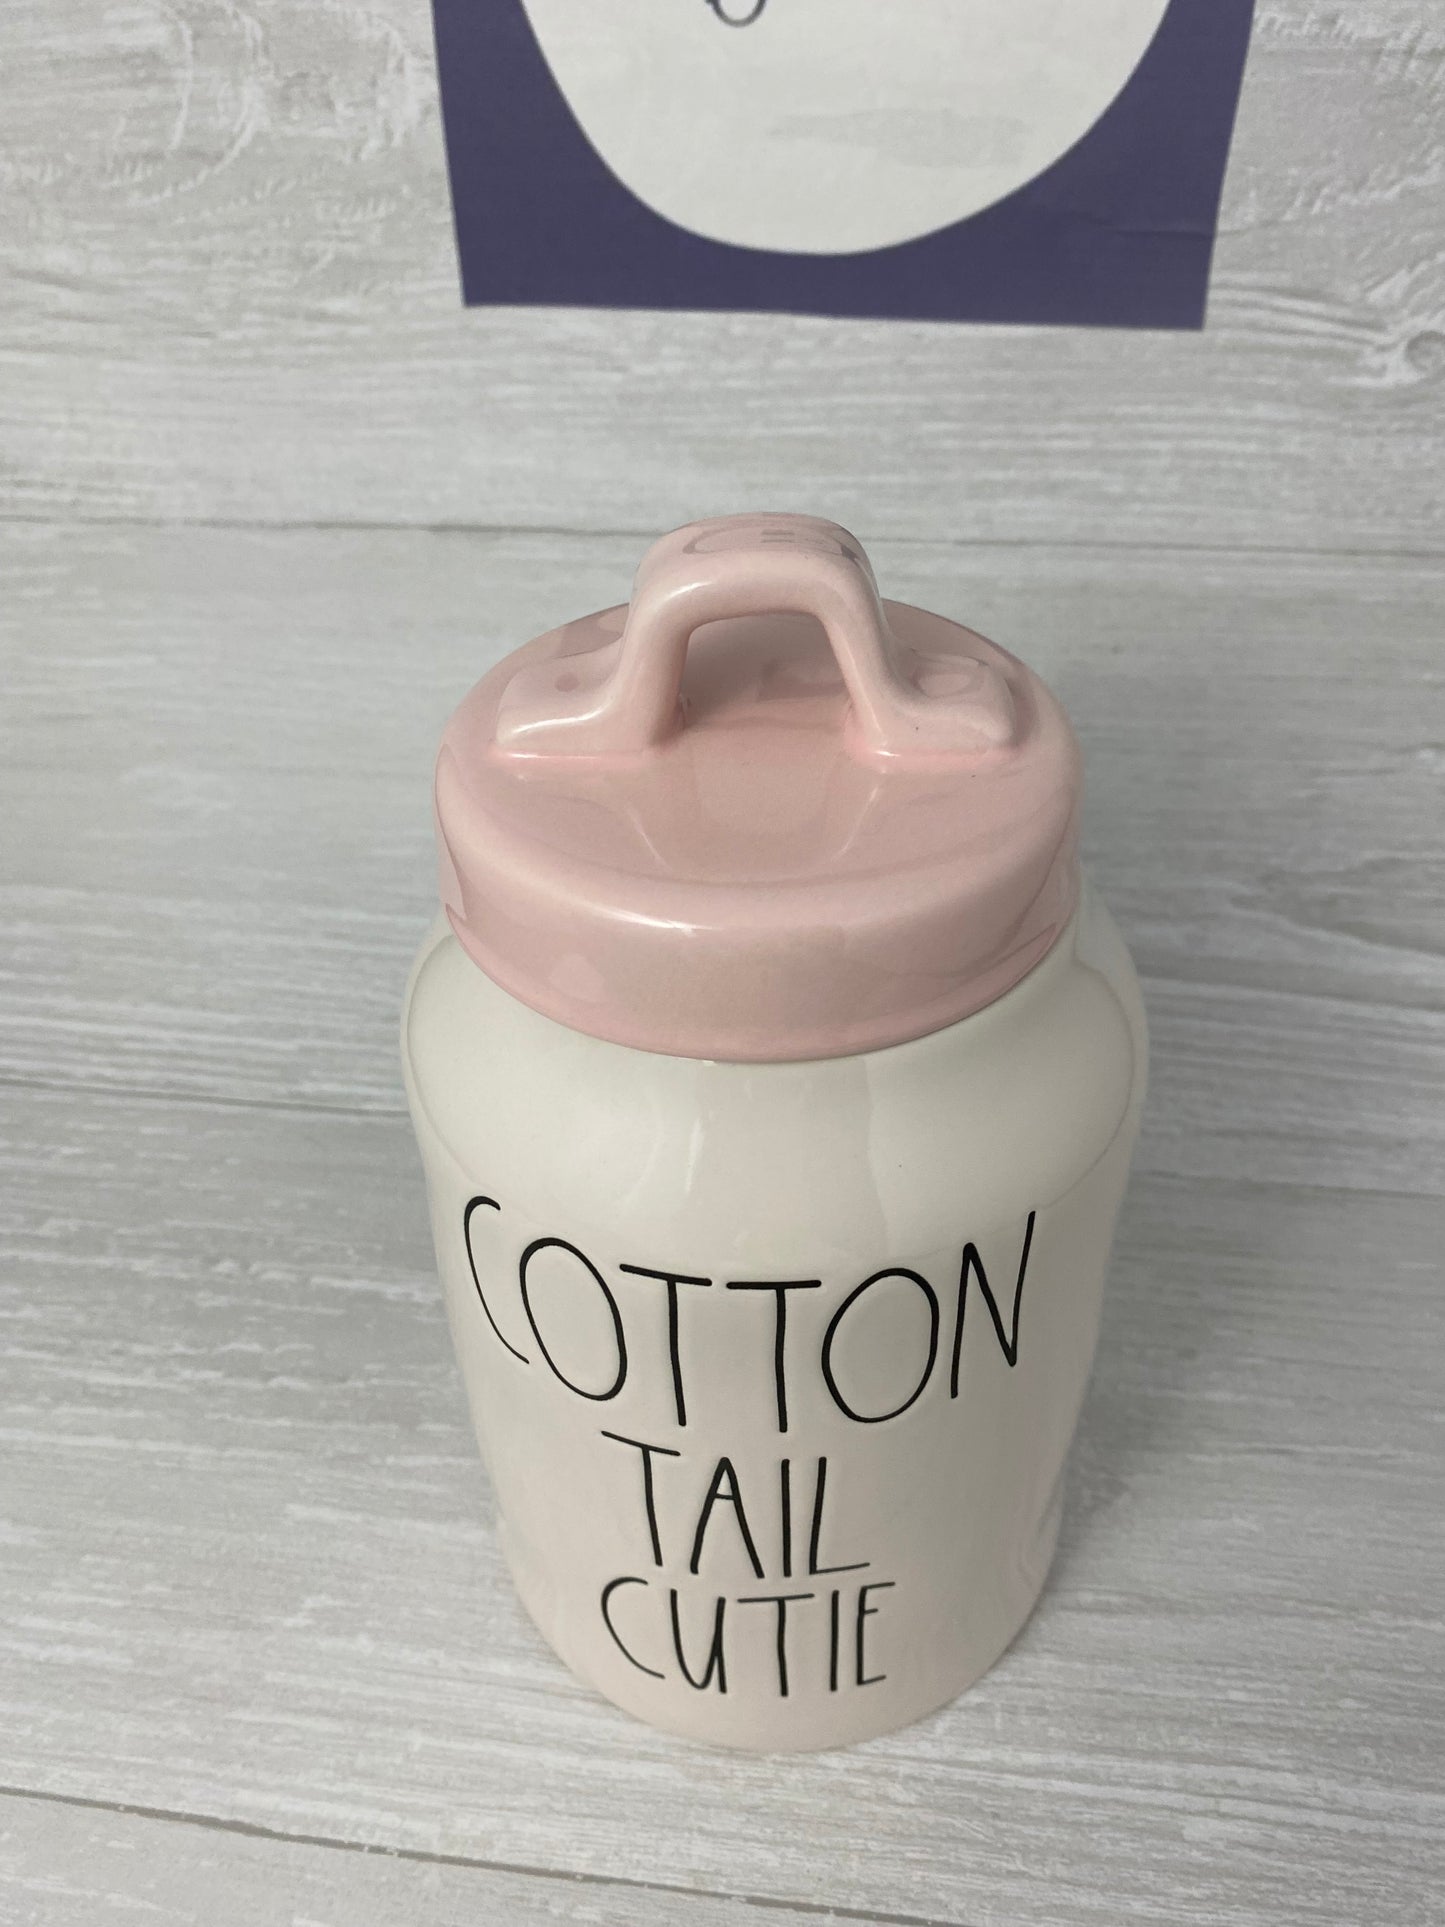 Rae Dunn Cotton Tail Cutie Canister